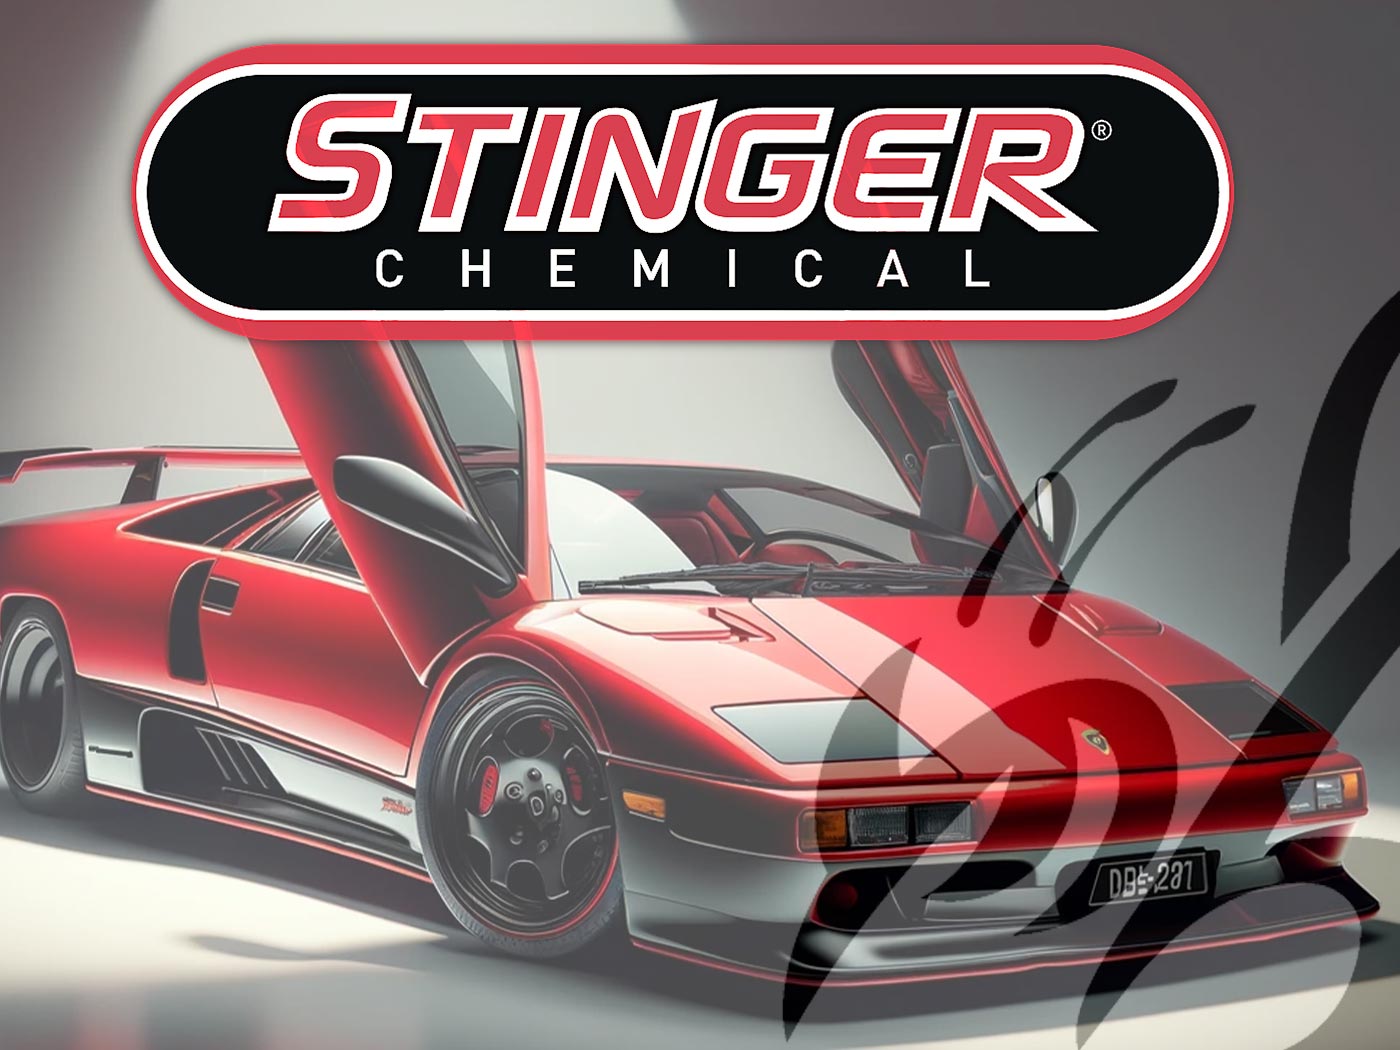 What is Stinger Chemical Brand